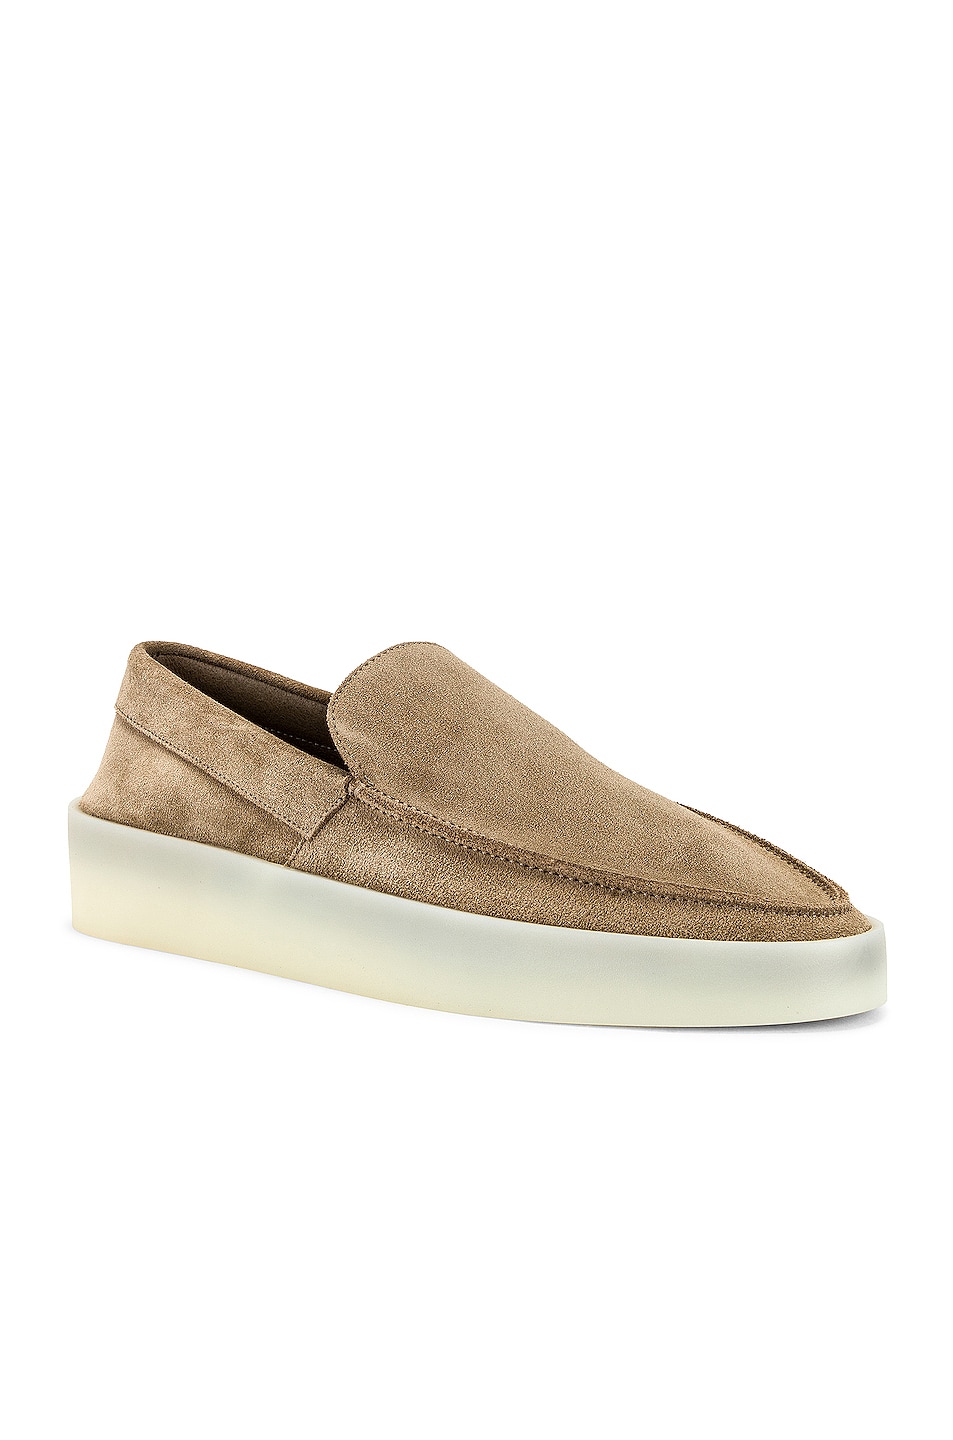 Image 1 of Fear of God The Loafer in Daino